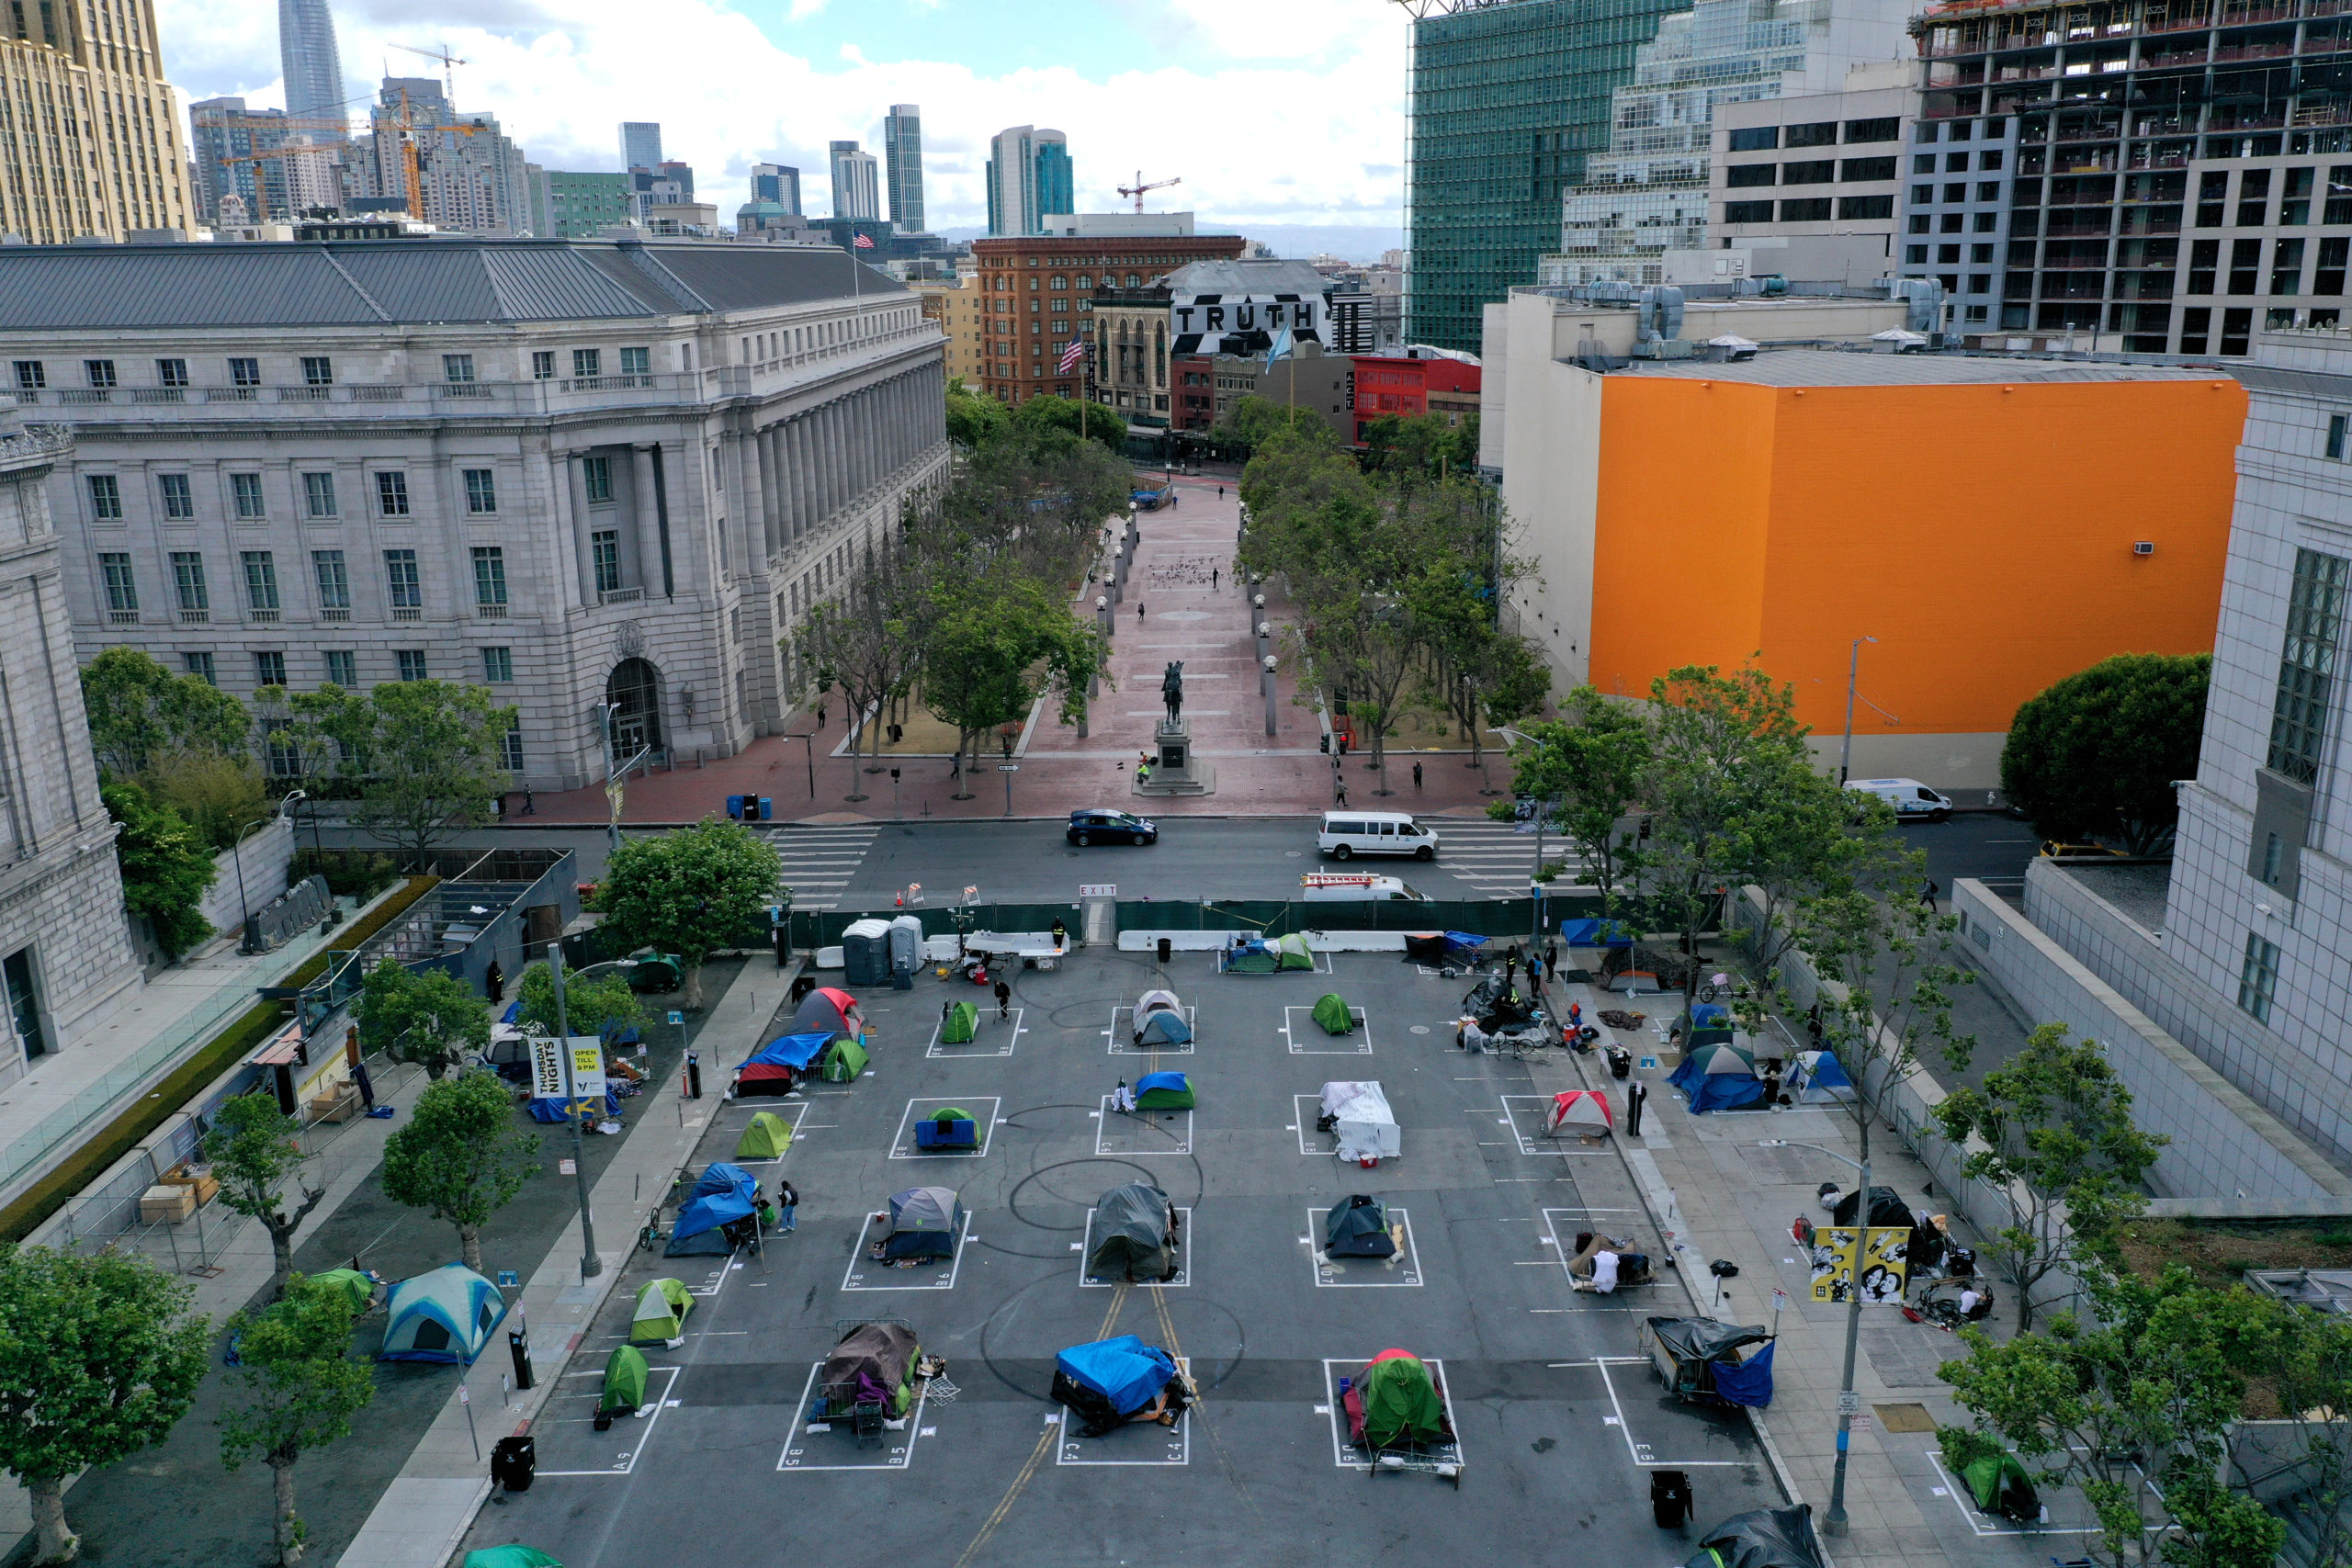 SAN FRANCISCO, CALIFORNIA - MAY 18: An aerial view of San Francisco's first temporary sanctioned tent encampment for the homeless on May 18, 2020 in San Francisco, California. After public outrage mounted over a surge of homeless people and tents filling the streets of San Francisco during the coronavirus (COVID-19) pandemic, the City opened its first temporary sanctioned tent encampment this week. The camp provides a safe sleeping area in a fenced-off space near City Hall with marked spots for tents that practice social distancing. Toilets, hand washing stations and 24 hours security will also be provided. Other locations throughout the city will be opening soon. (Photo by Justin Sullivan/Getty Images)